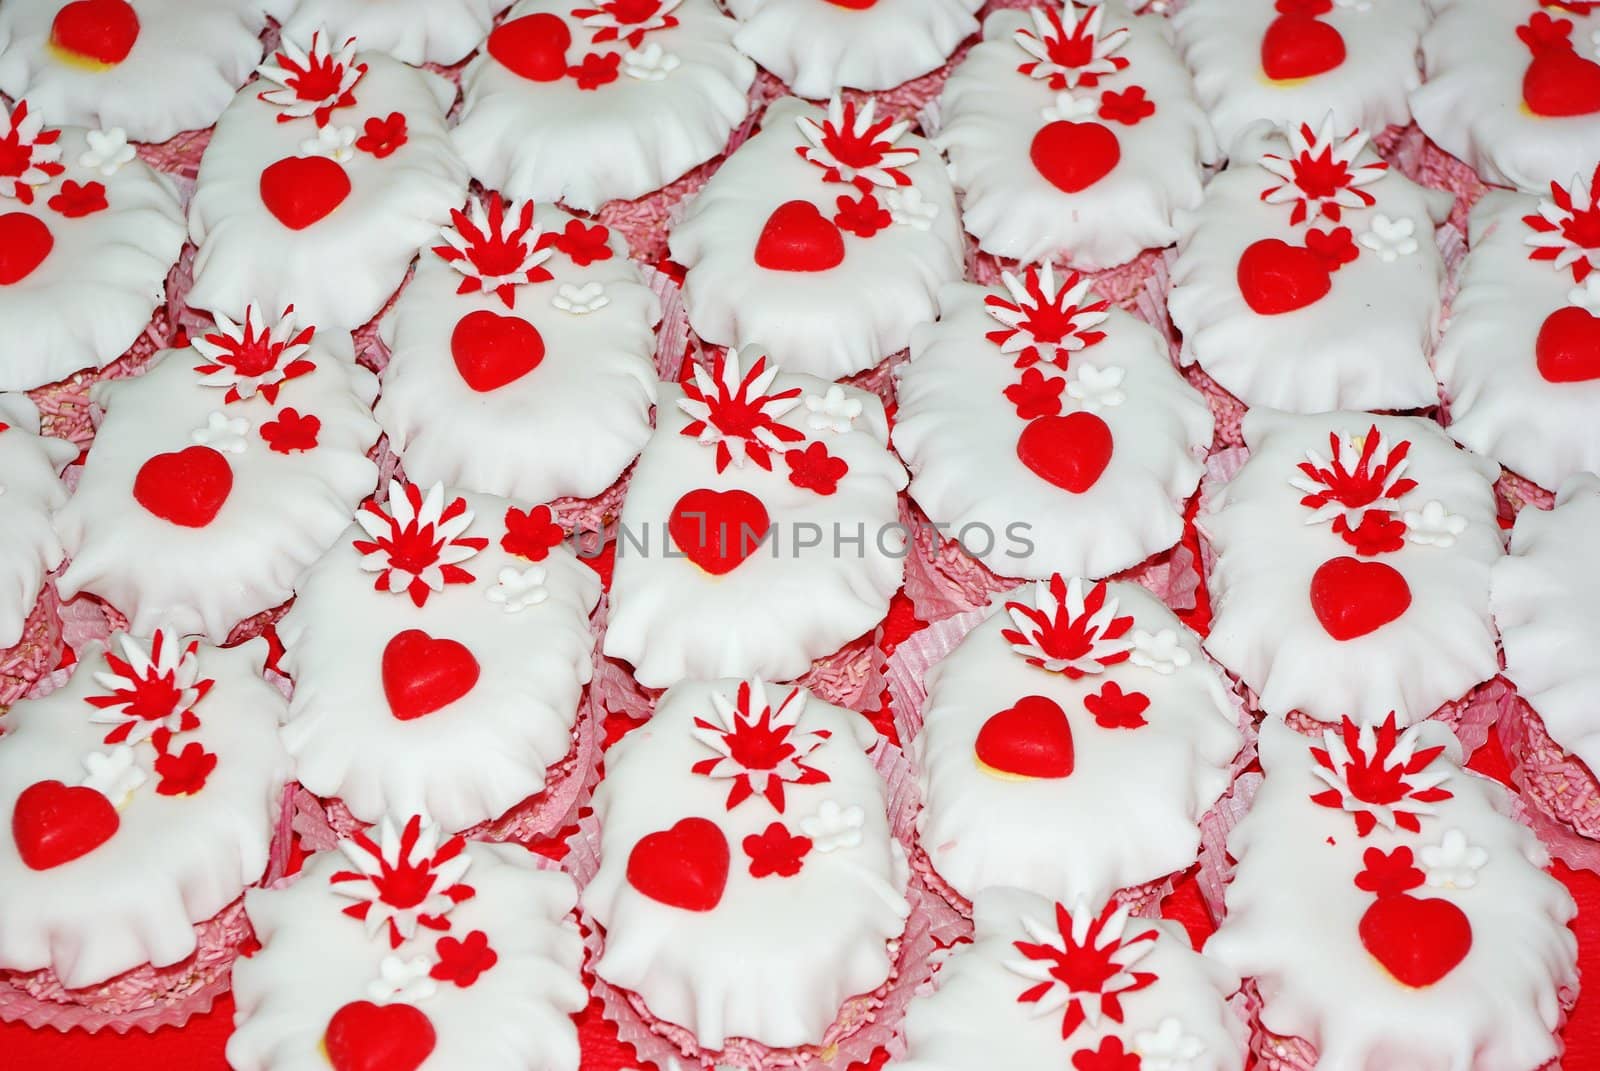 A lot of cakes decorated with little red hearts